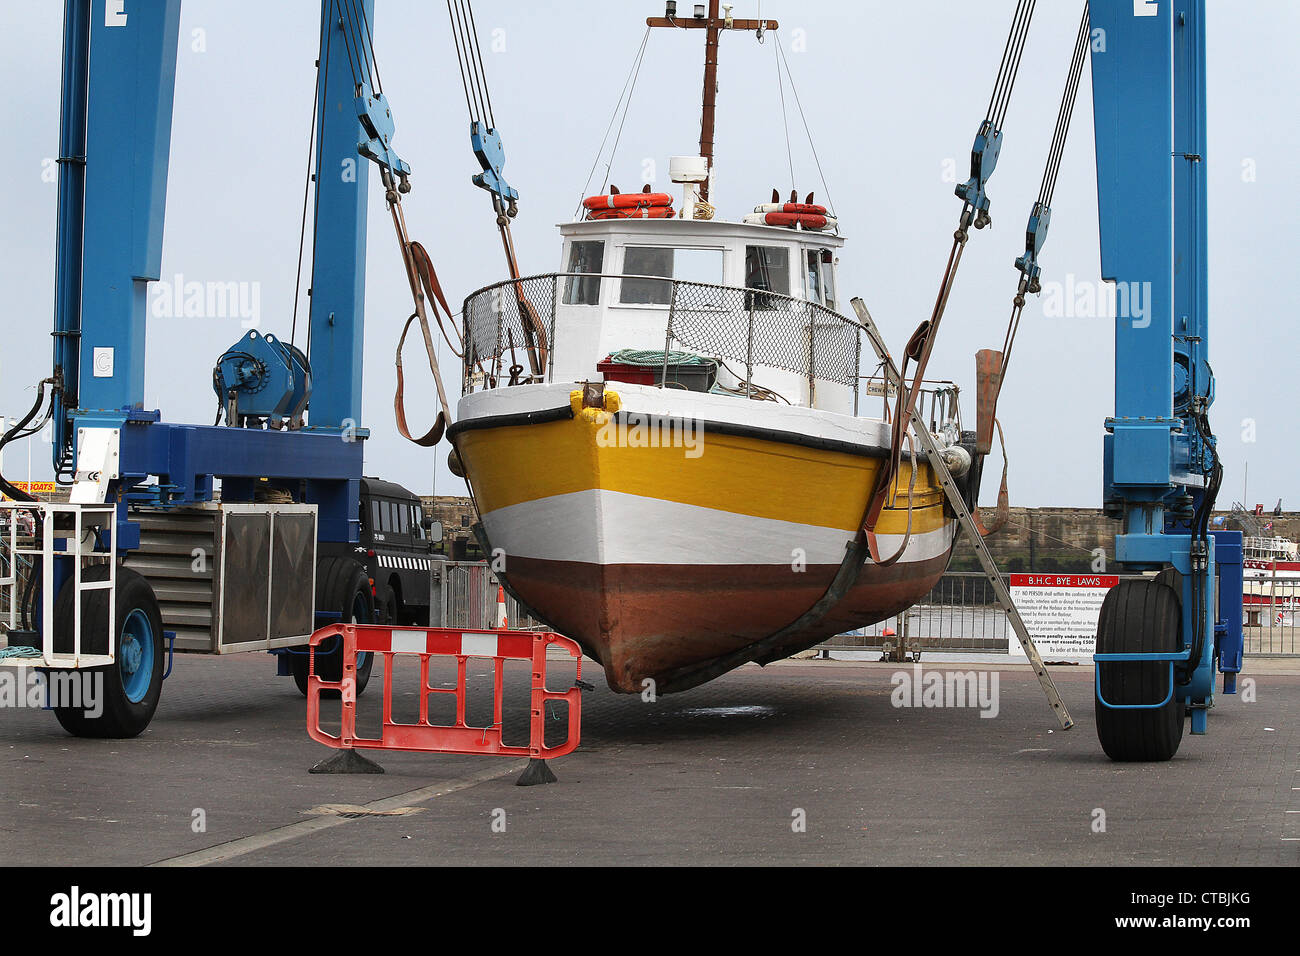 Boat in crane lift sling on harbor quay side for repair work. Stock Photo